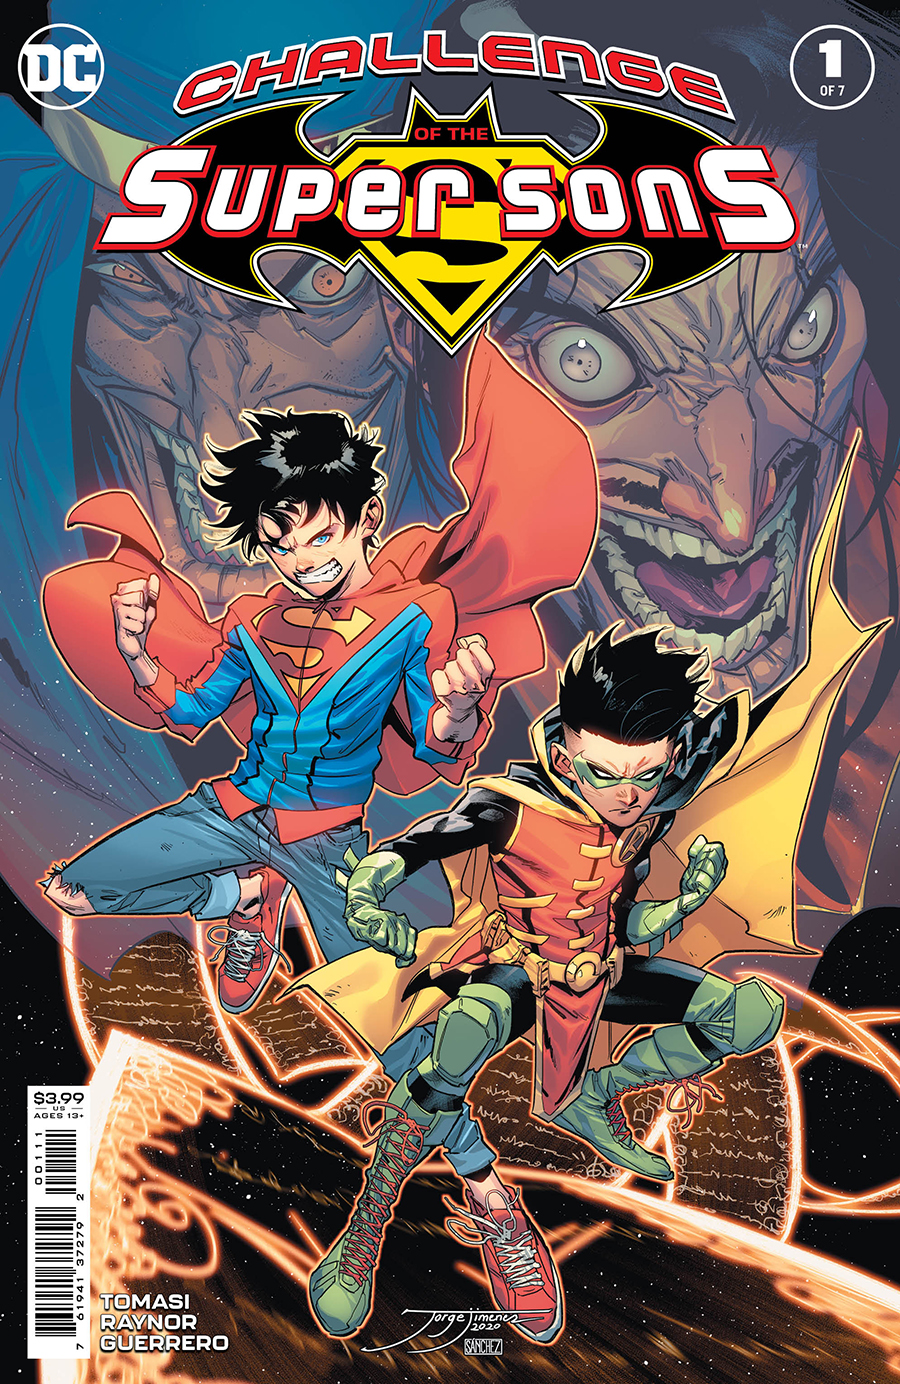 Challenge of the Super Sons #1 Cover A Jorge Jimenez (Of 7) (2021)